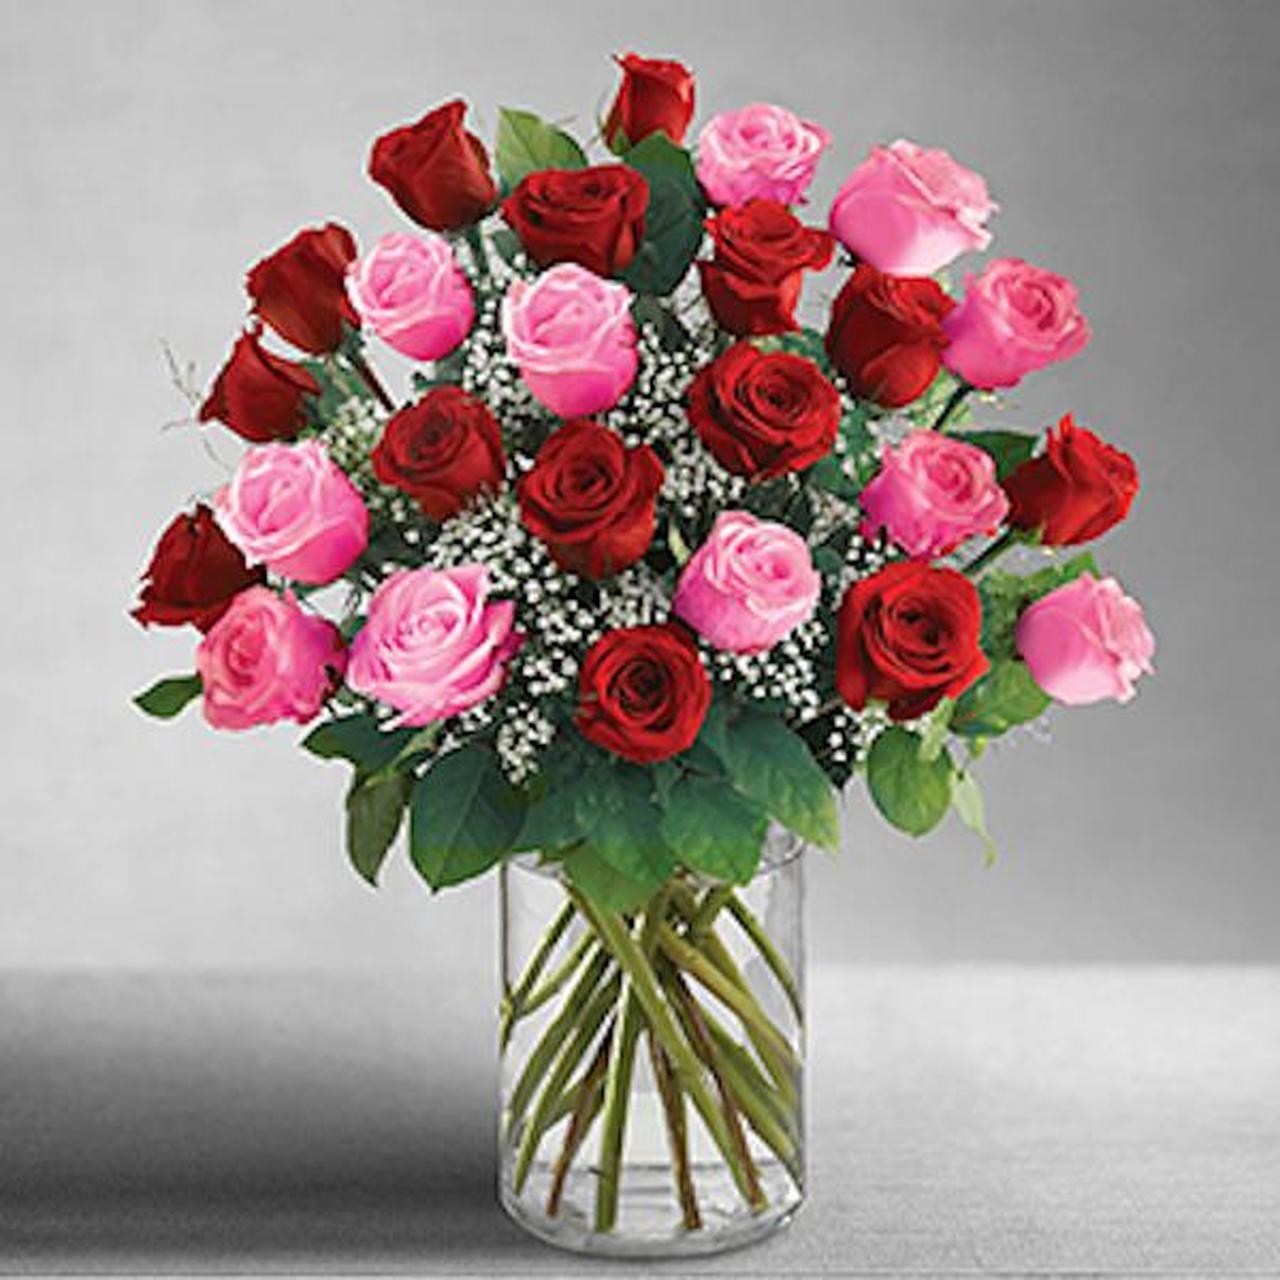 2 dozen red and pink roses | Same Day Delivery | The Flower Shop Atlanta